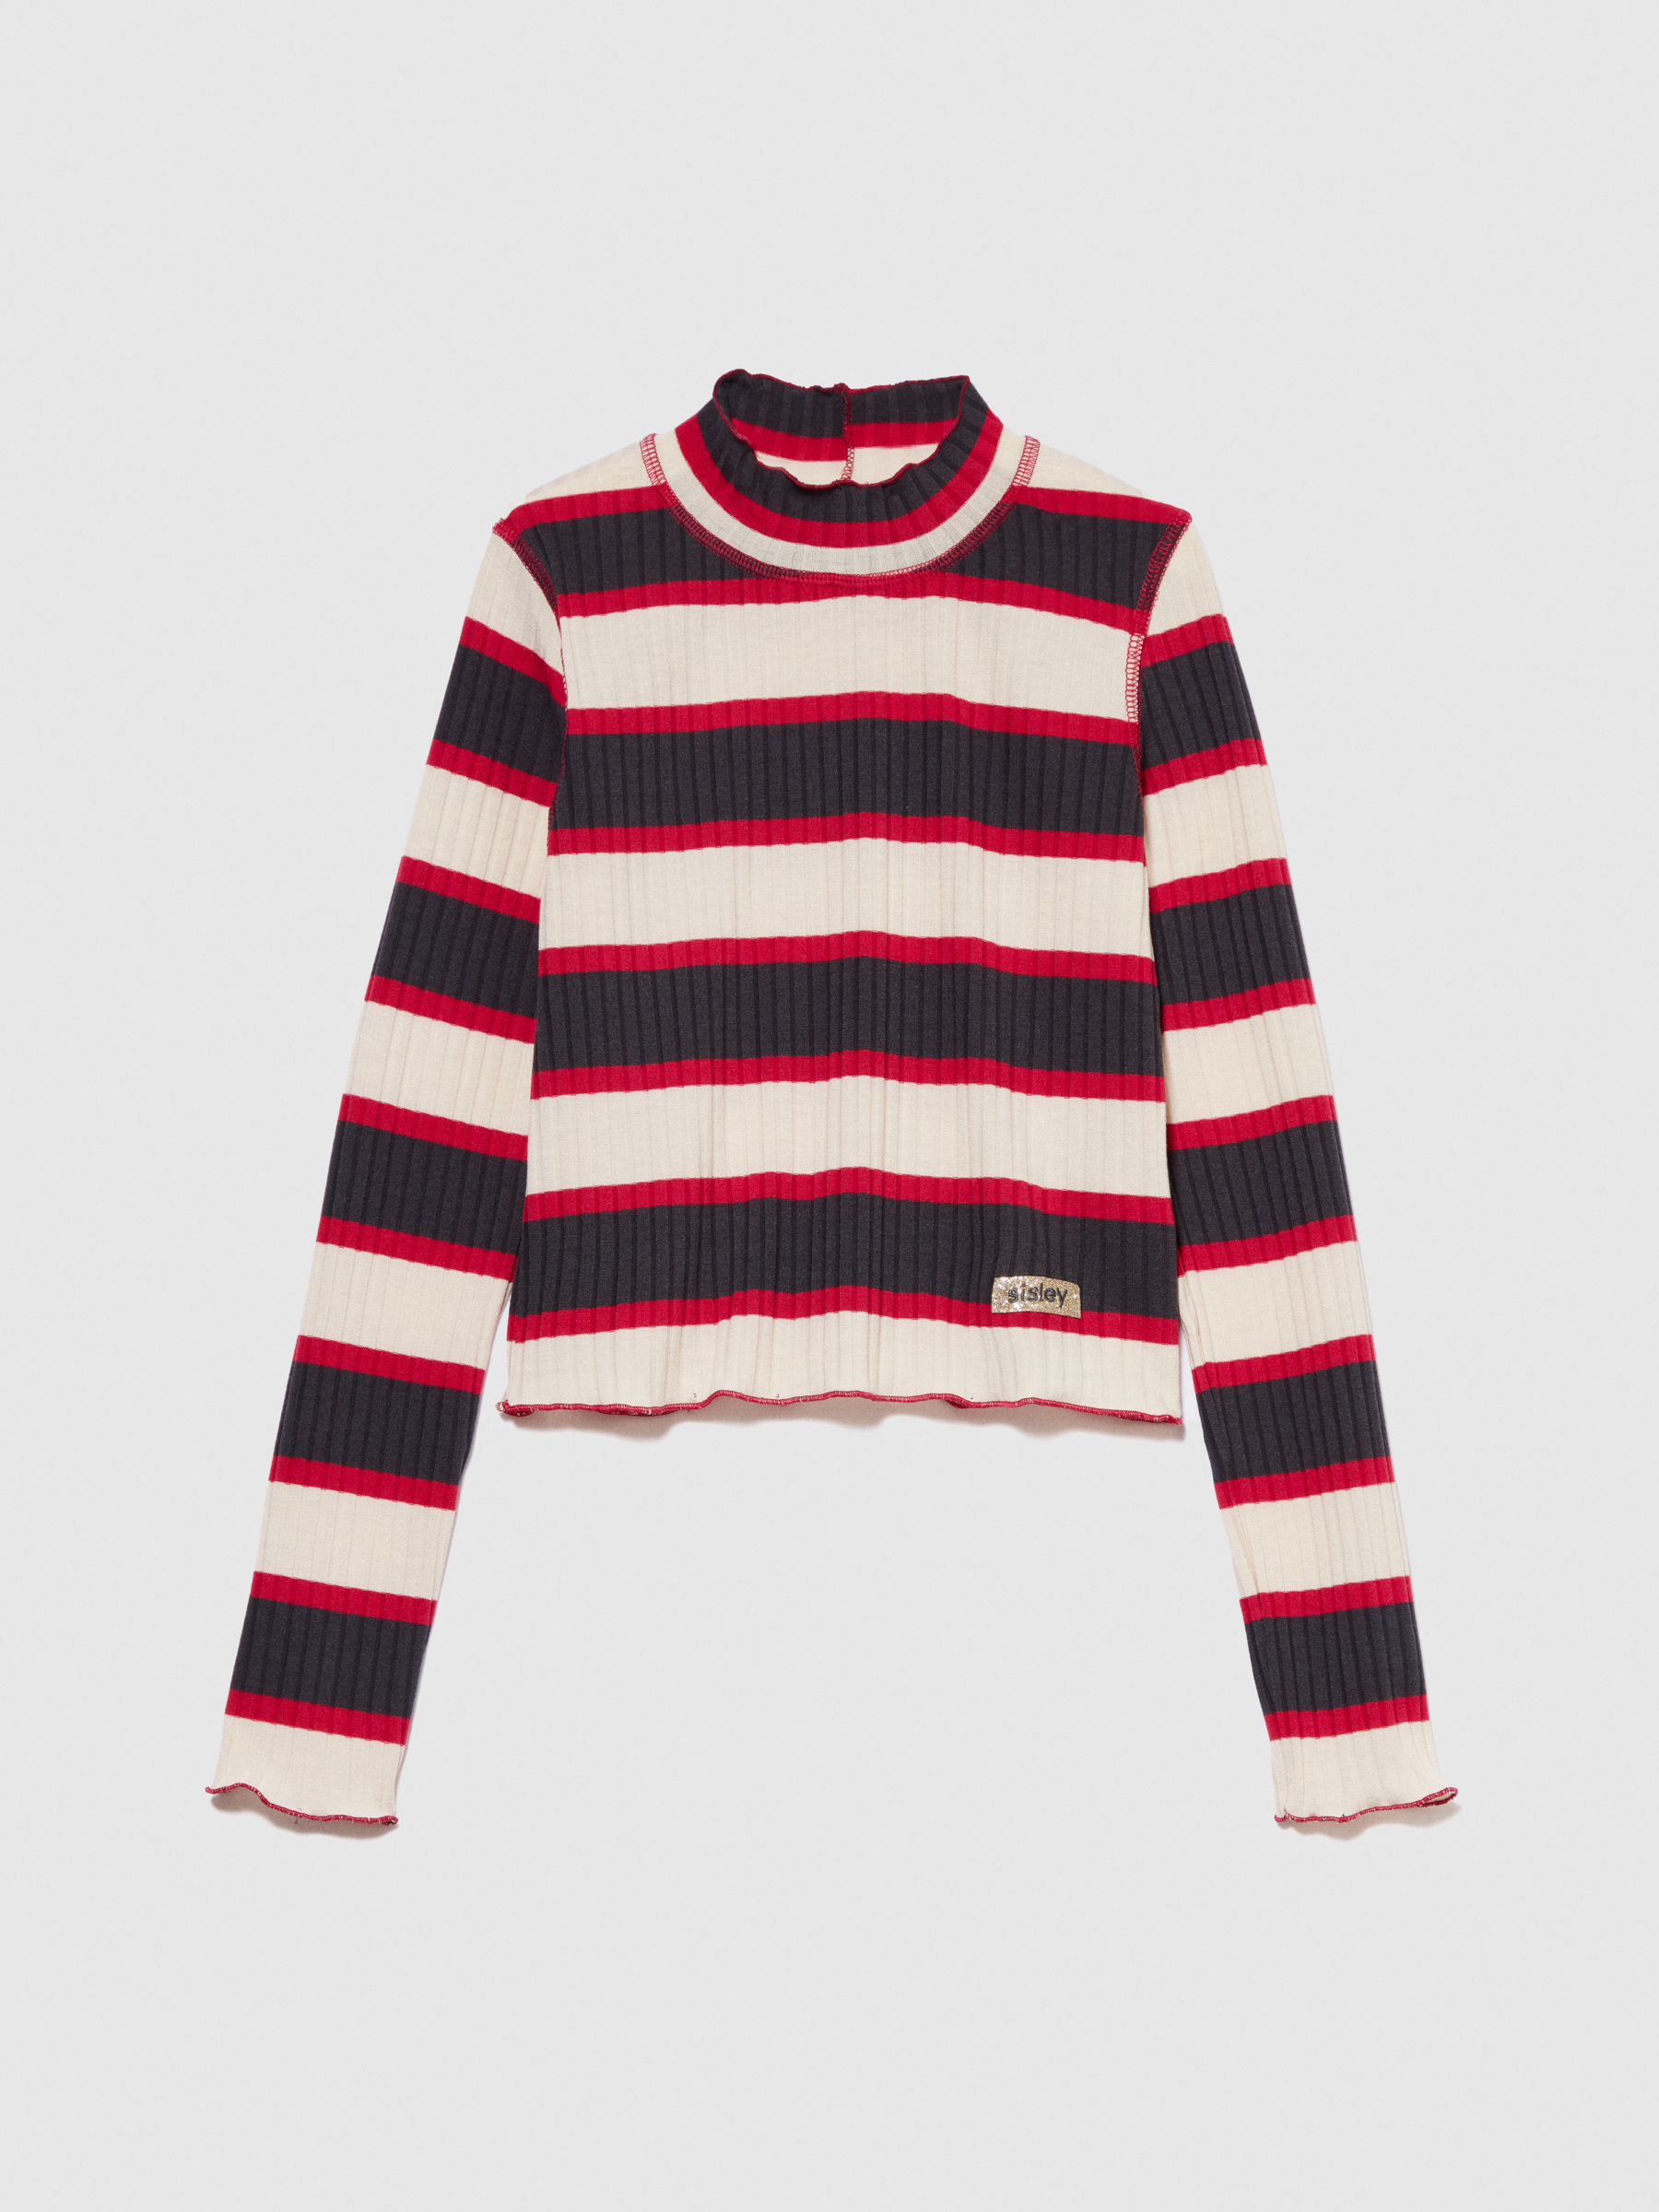 Sisley Young - Striped Turtleneck T-shirt, Woman, Multi-color, Size: KL